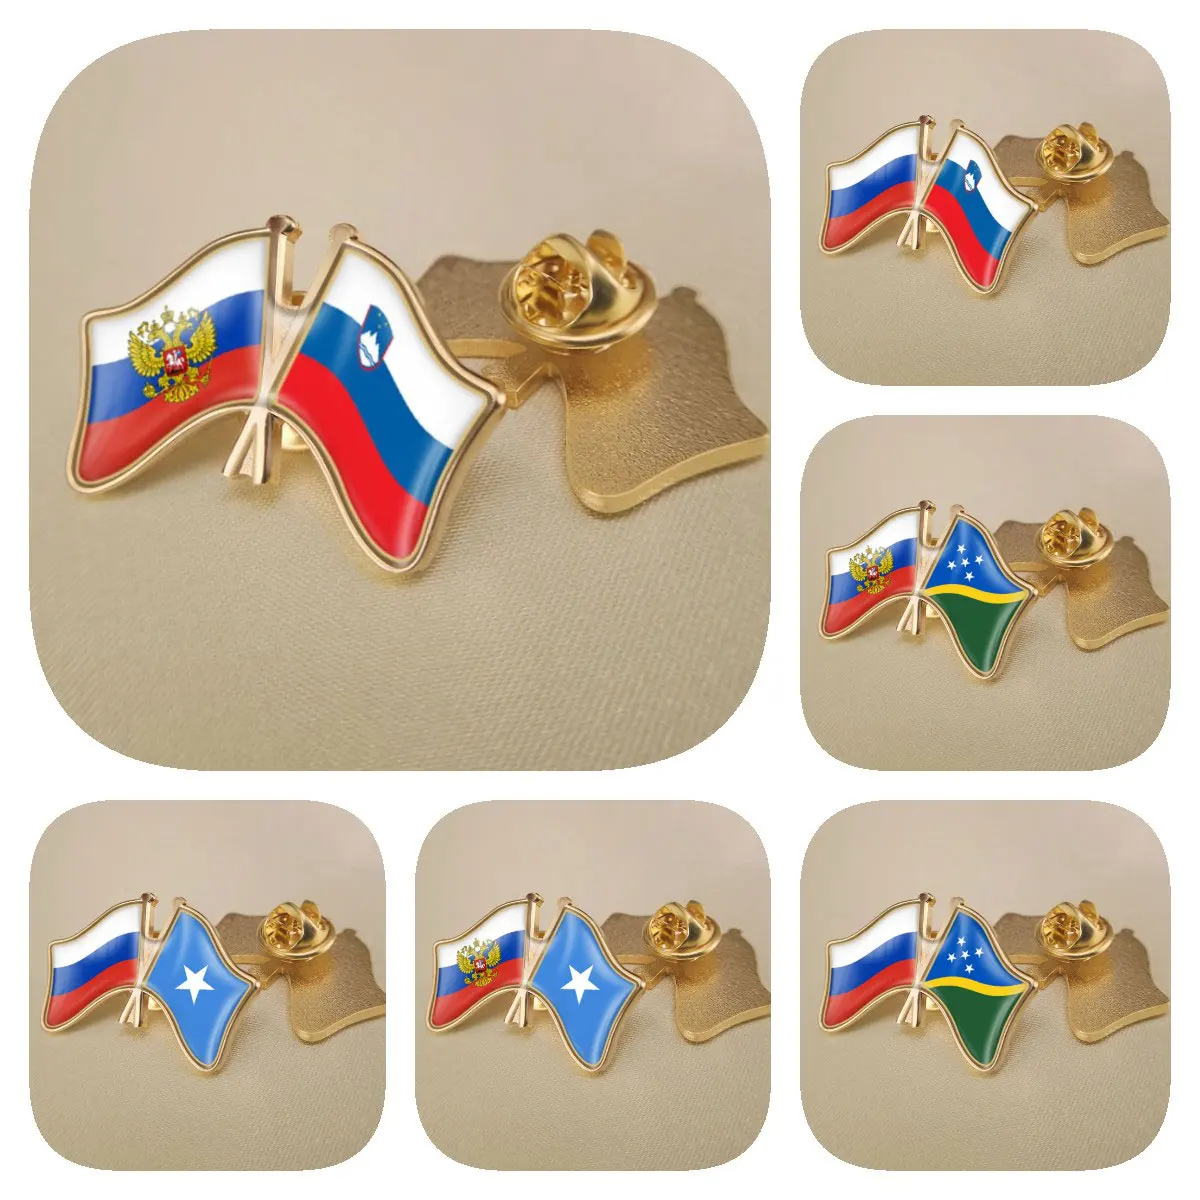 

Russian Federation and Slovenia Solomon Islands Somalia Double Crossed Friendship Flags Brooches Lapel Pins Badges